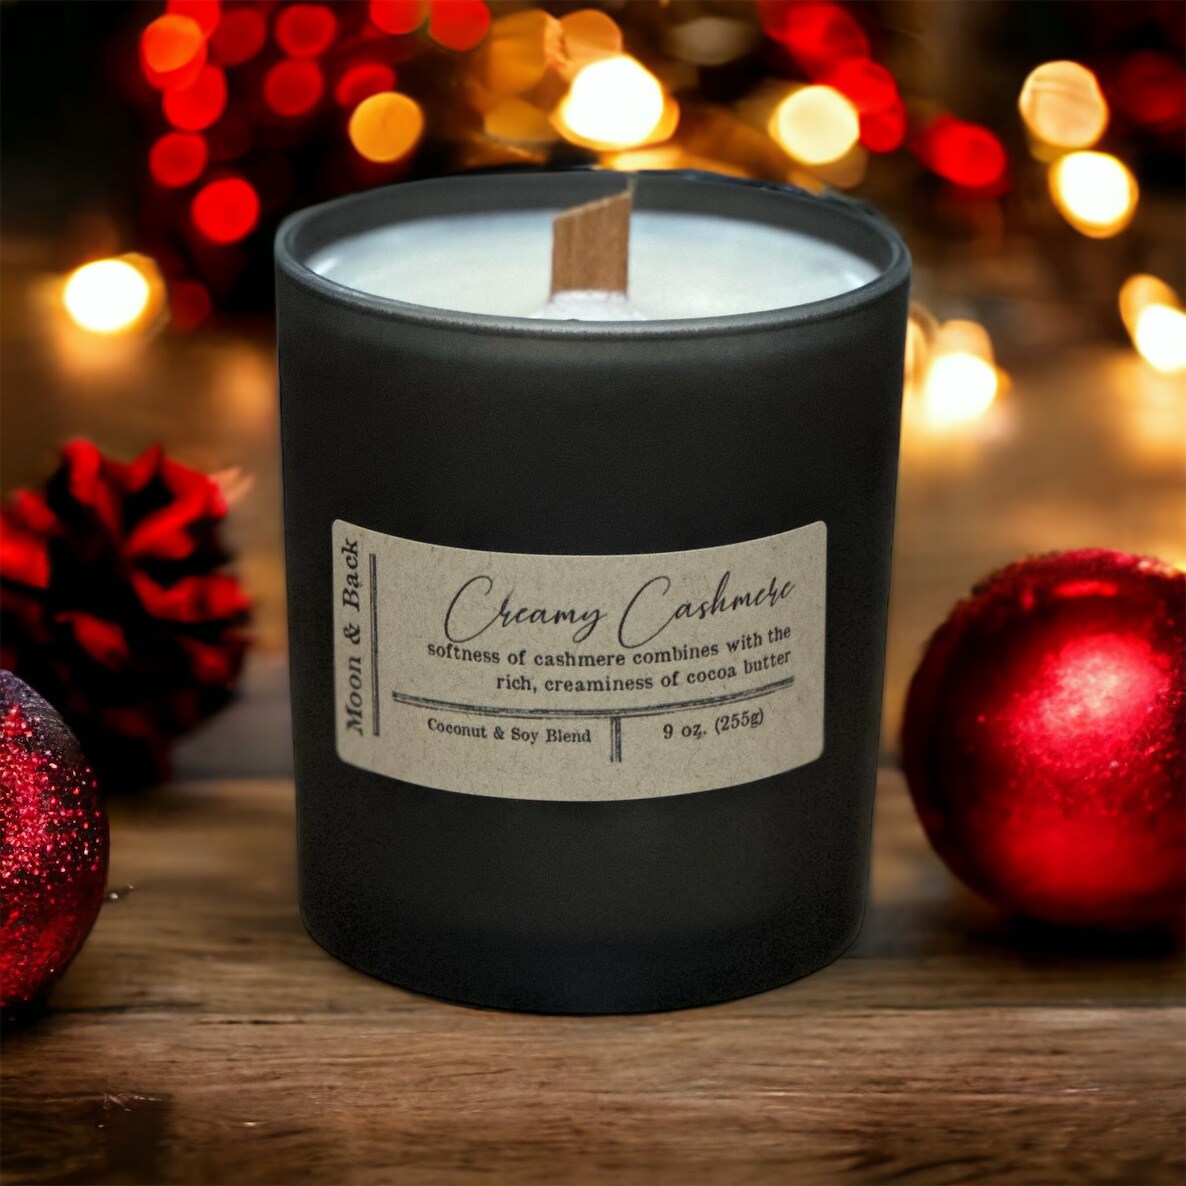 Cocoa Butter Cashmere, Wooden Wick Candle 7 oz